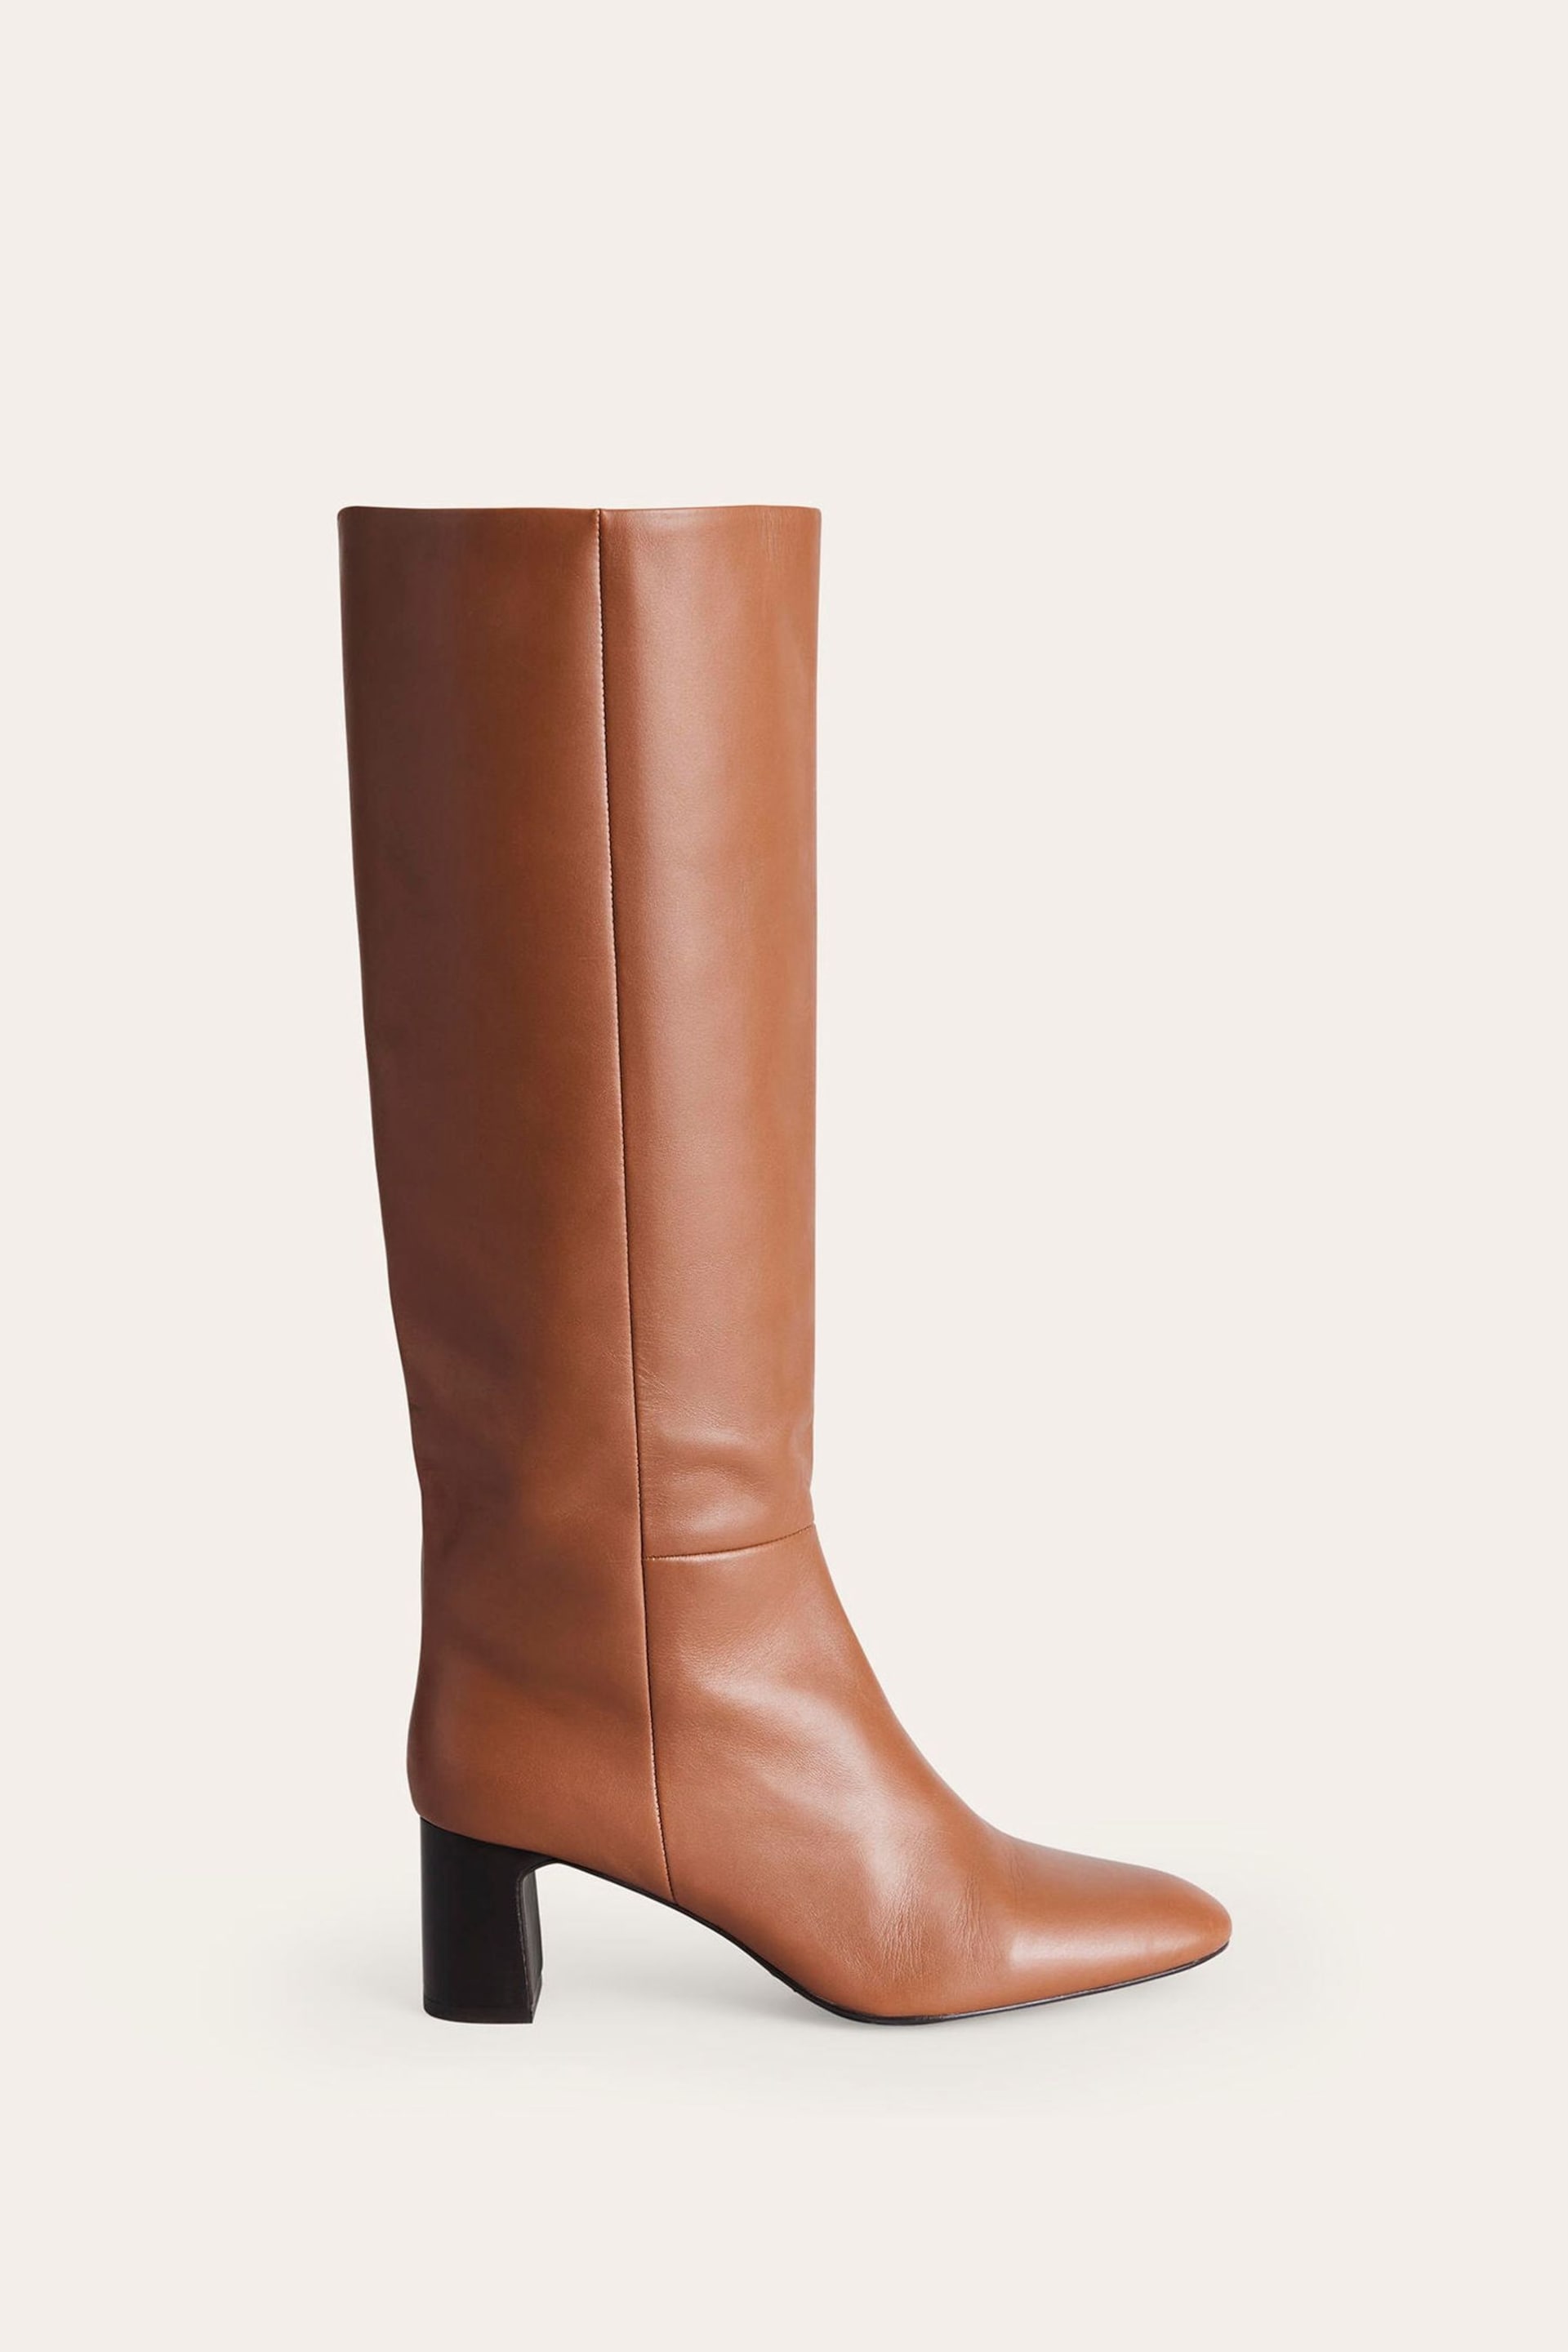 Boden Brown Erica Knee High Leather Boots - Image 2 of 5